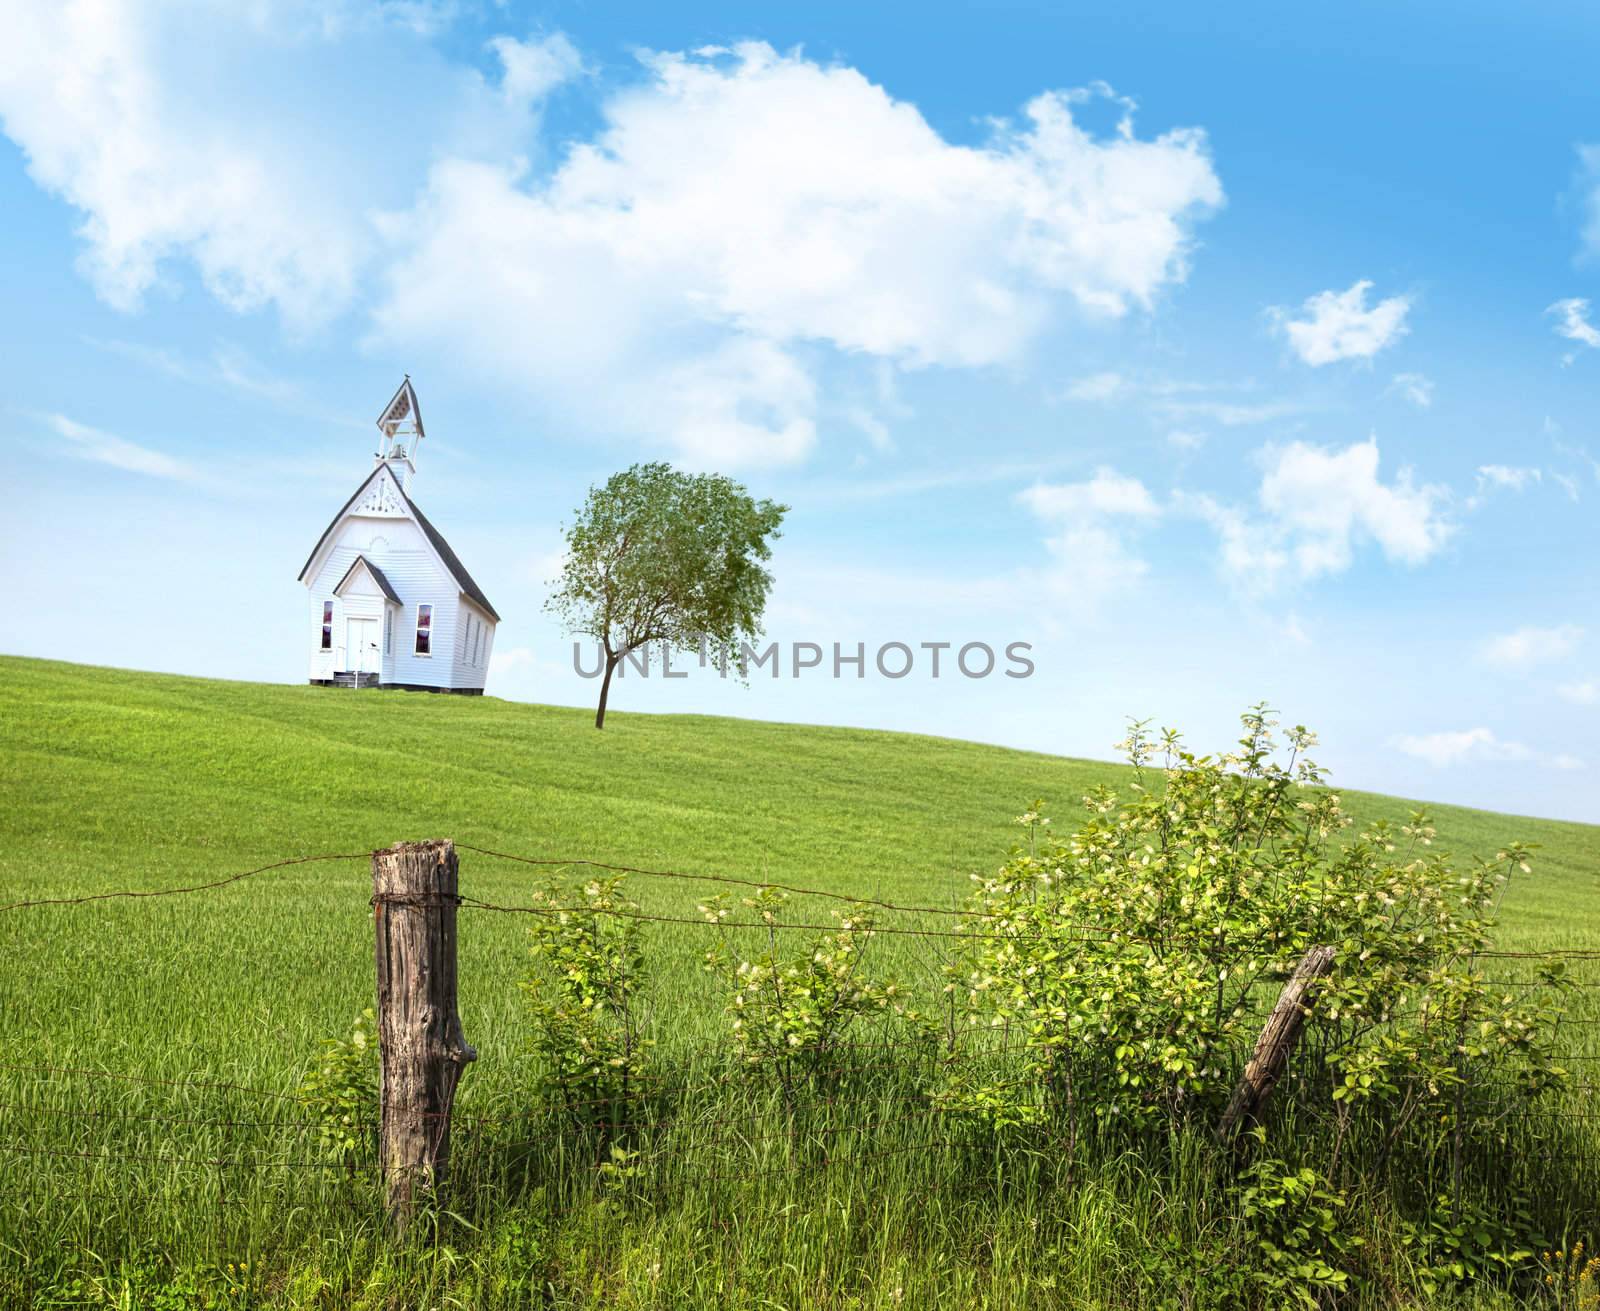 Old country school house  on a hill  by Sandralise